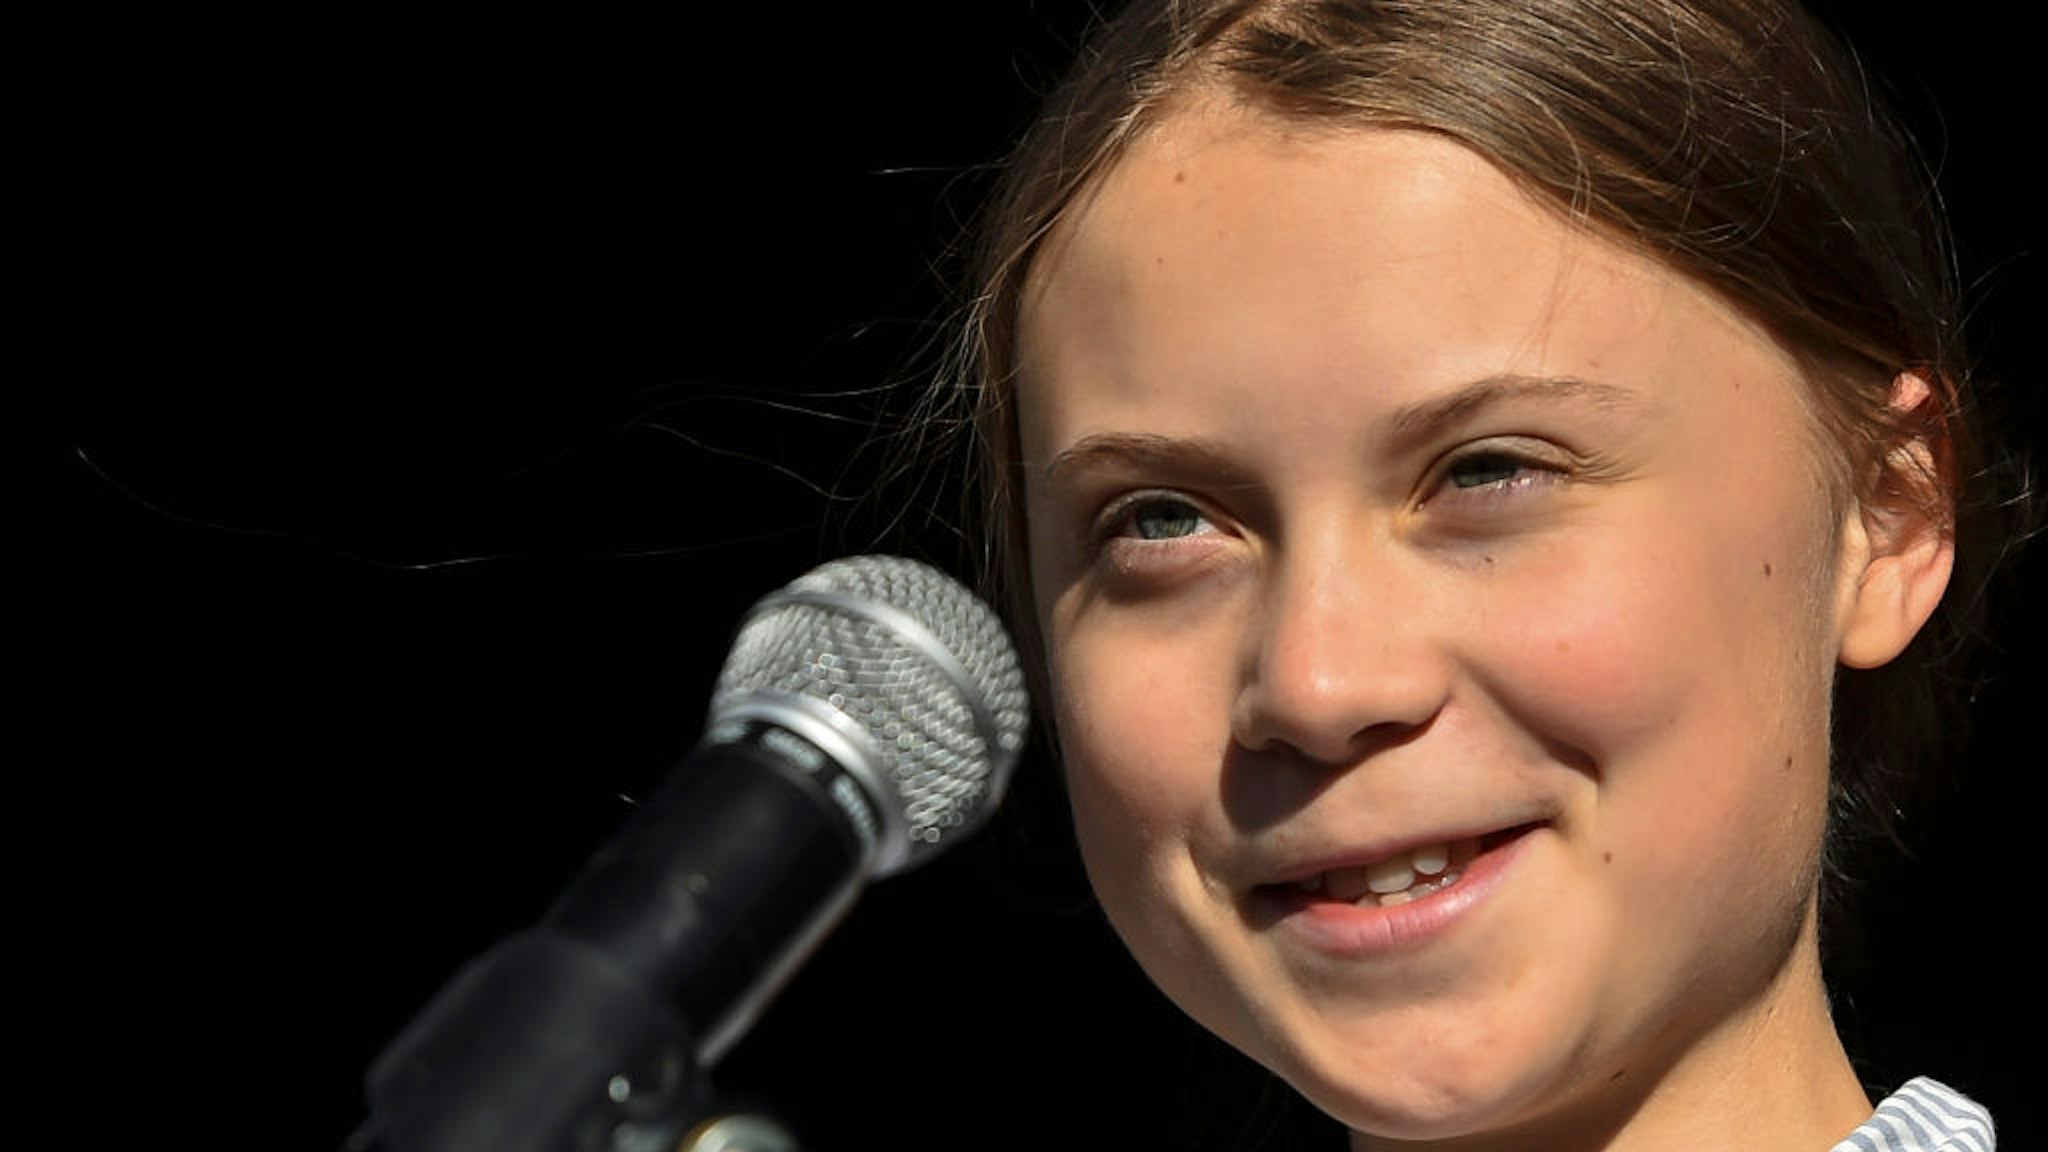 Swedish climate activist Greta Thunberg takes to the podium to address young activists and their supporters during the rally for action on climate change on September 27, 2019 in Montreal, Canada.